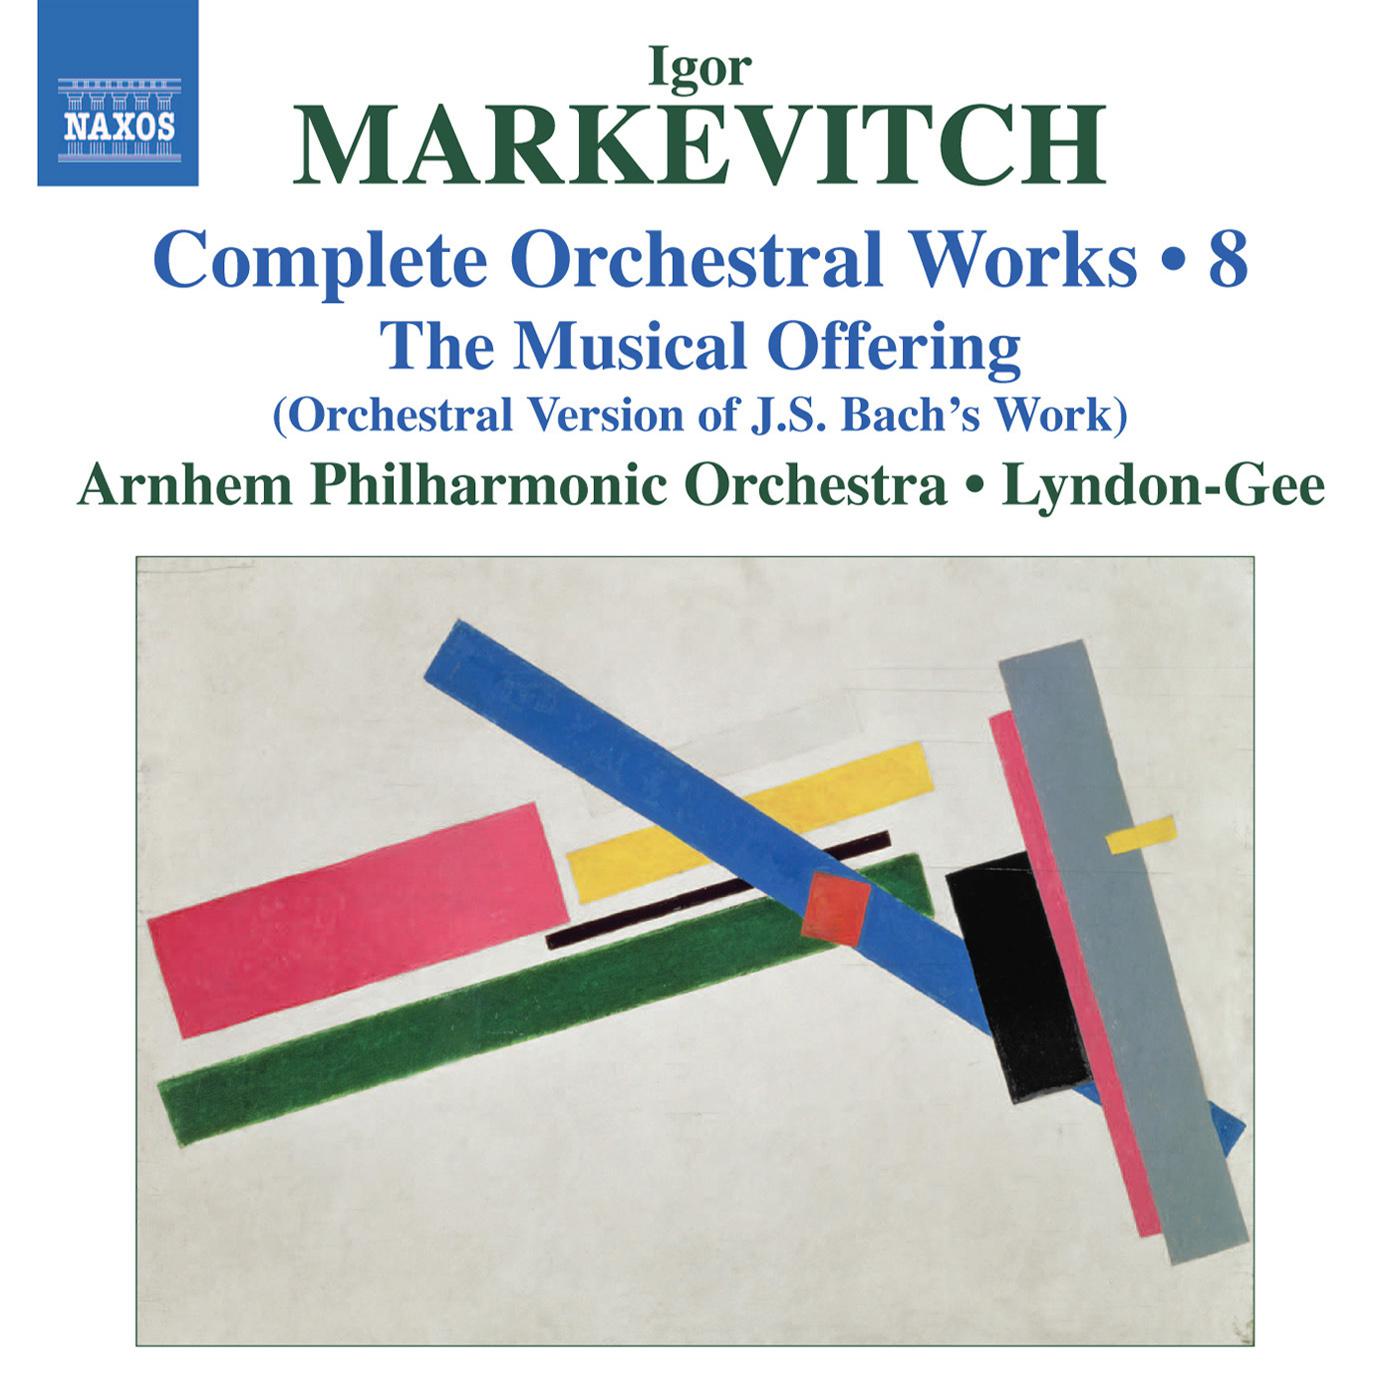 Christopher Lyndon-Gee - Musical Offering, BWV 1079 (orch. I. Markevitch):Sonata: II. Allegro (with orchestral interpolations)